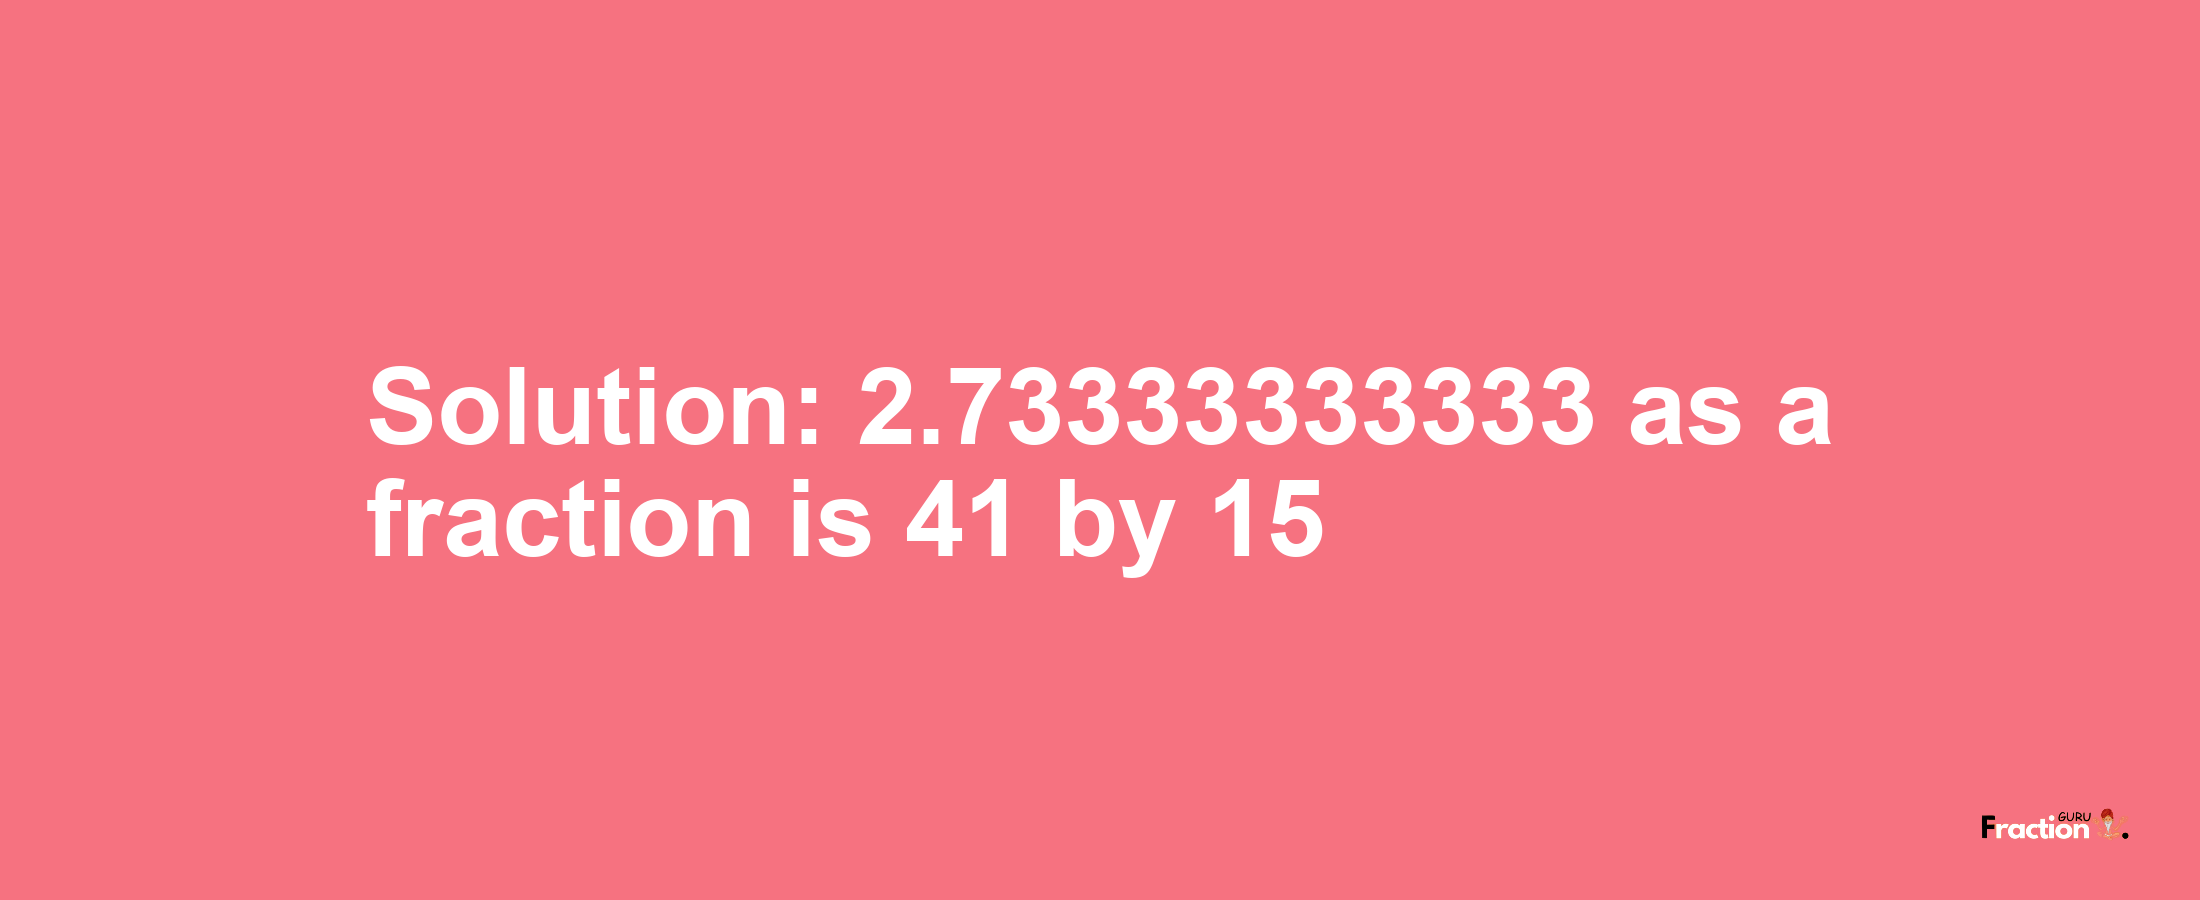 Solution:2.73333333333 as a fraction is 41/15